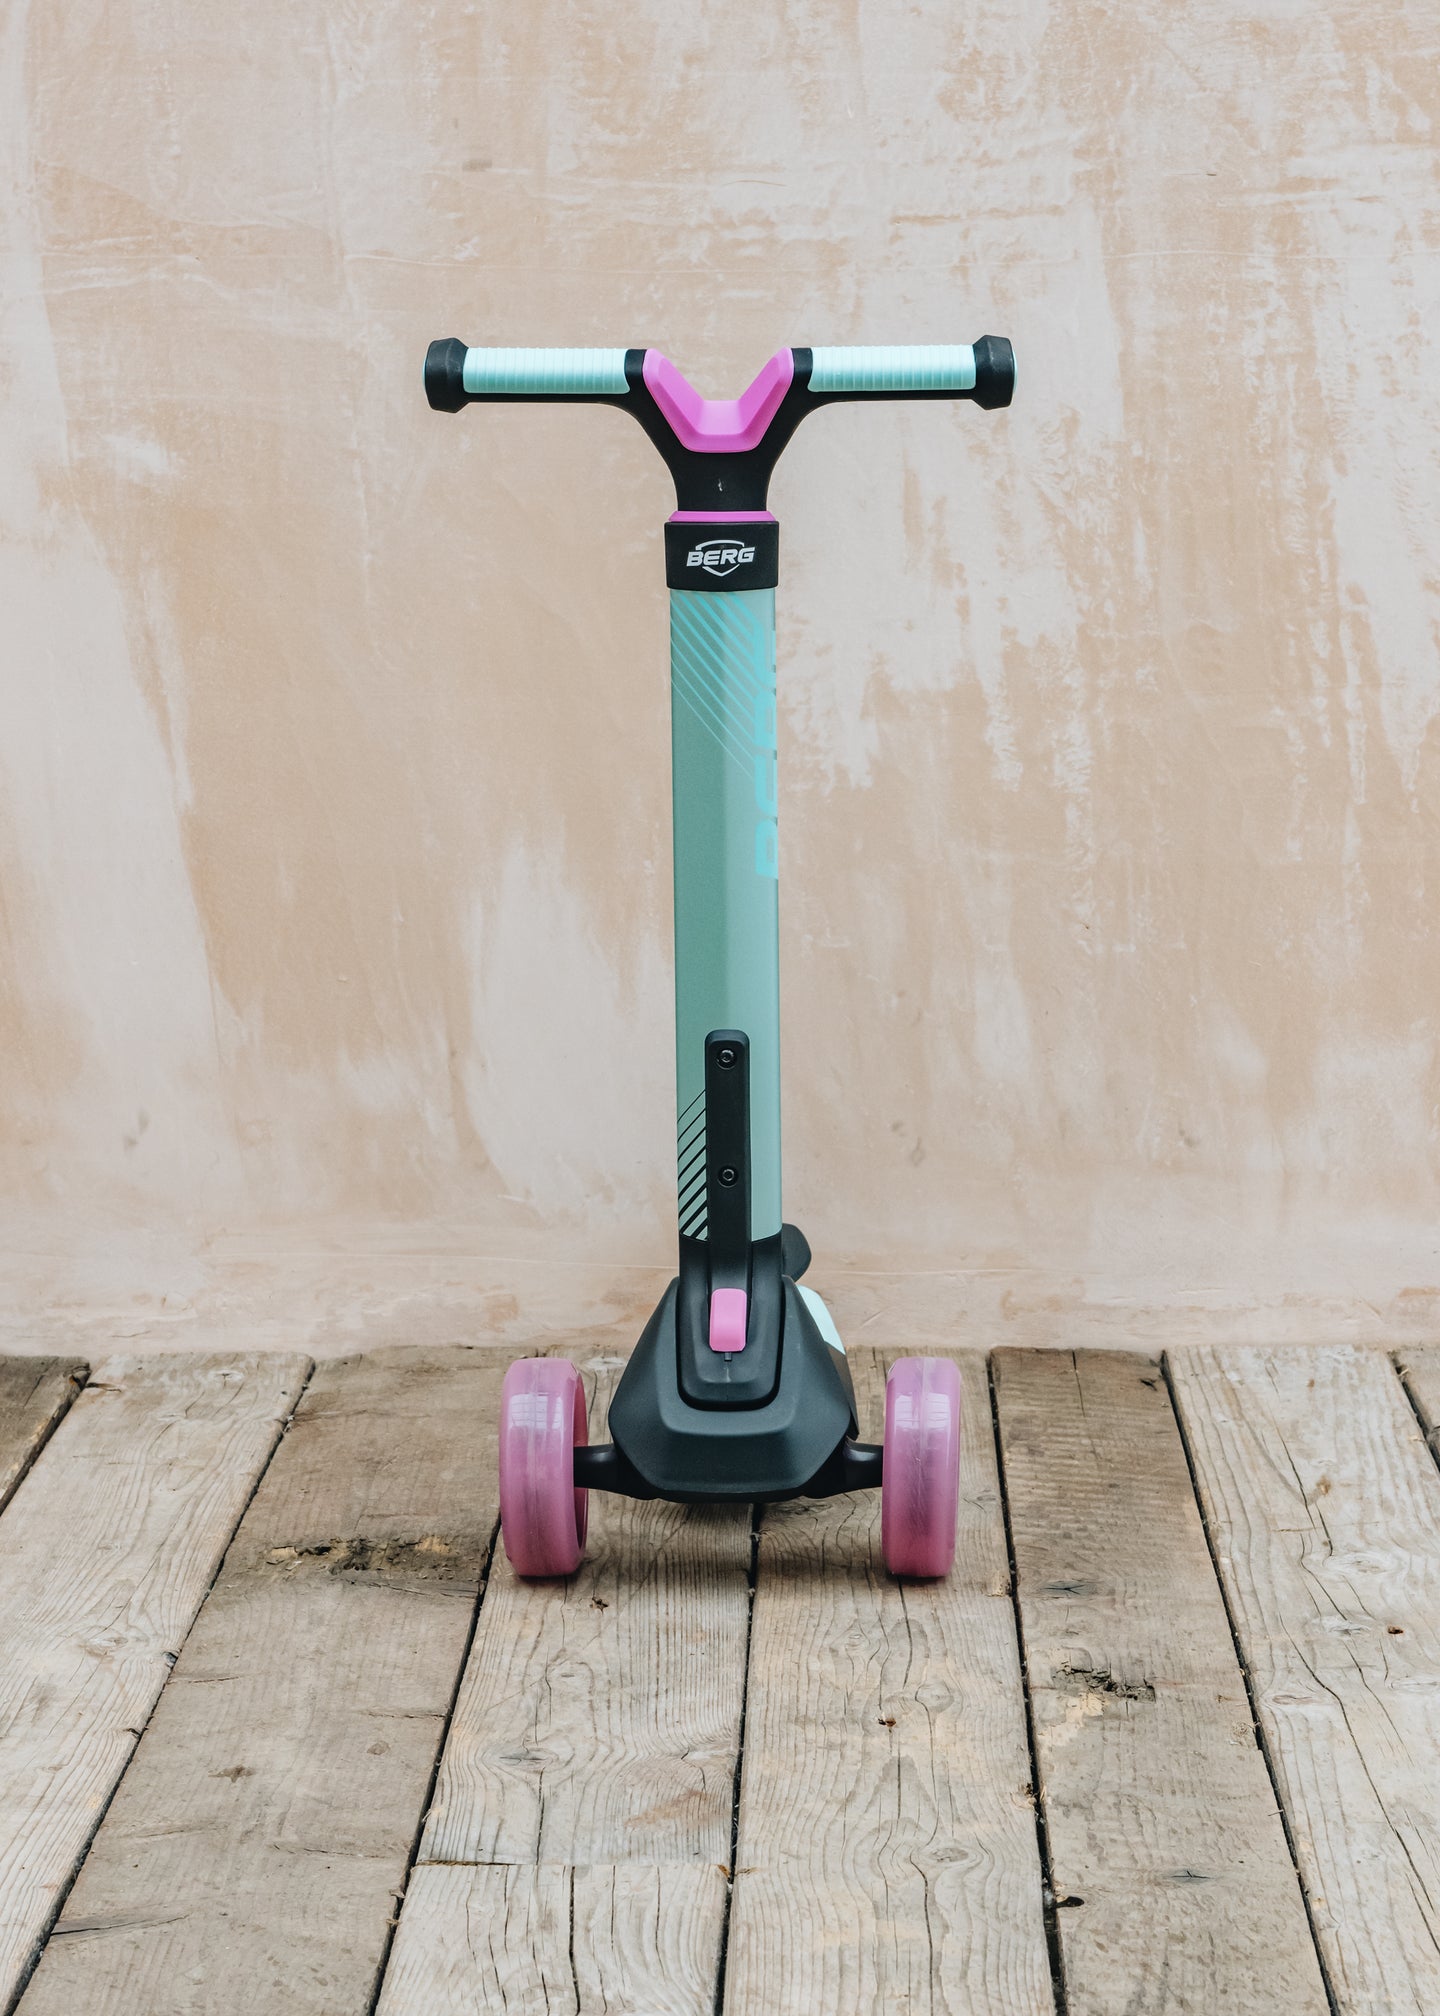 Berg Toys Nexo Foldable Scooter in Mint